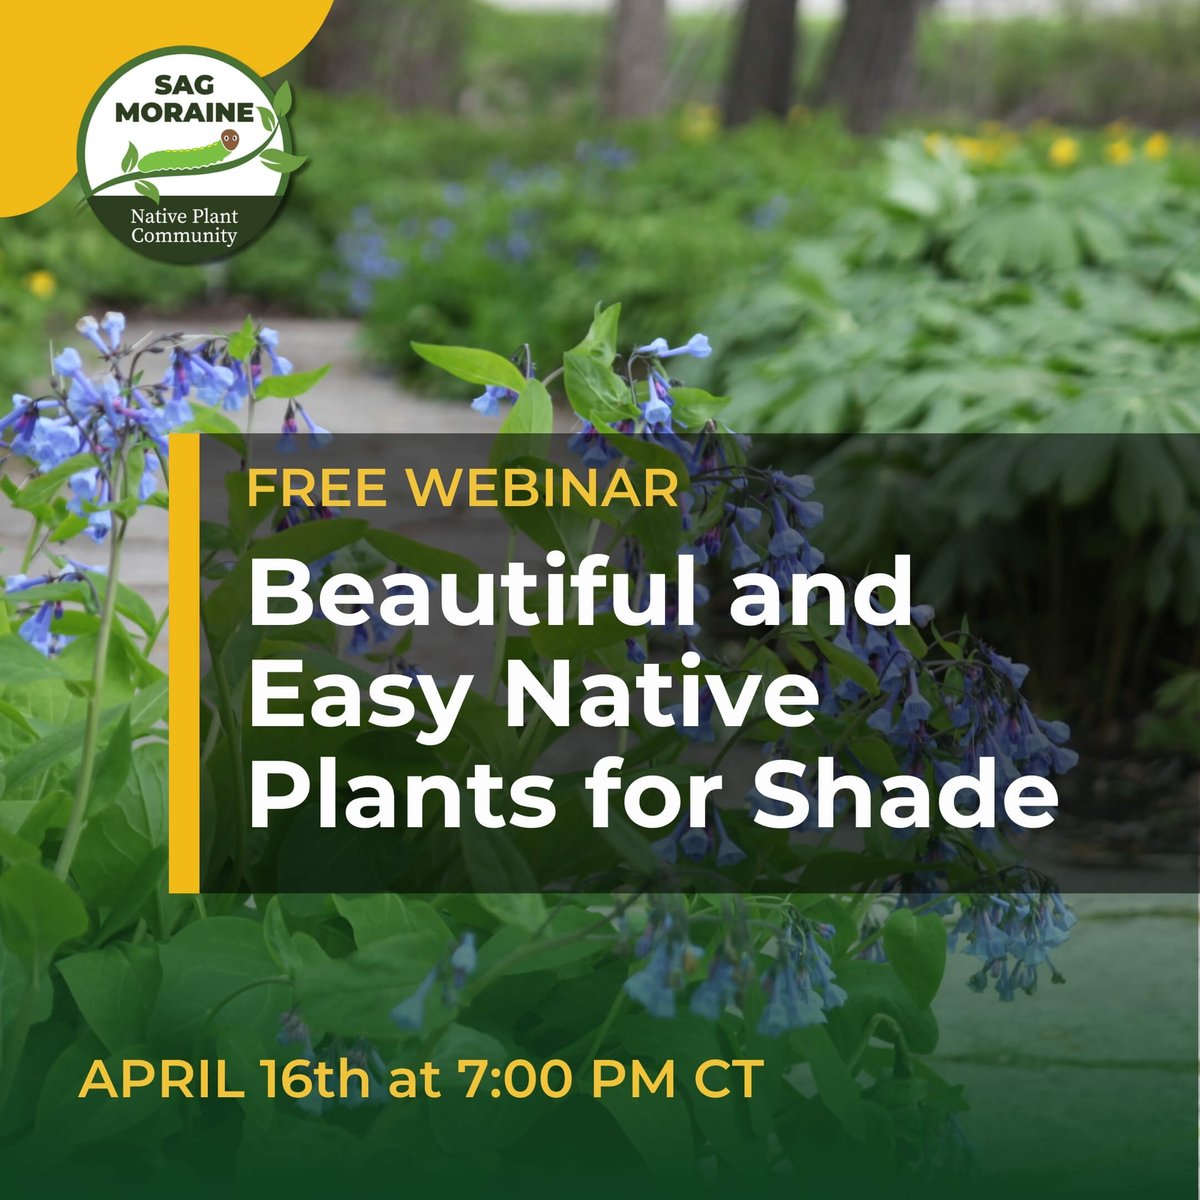 🌿 Discover the beauty and importance of native shade plants in this informative and inspiring video! 🌿 

“Beautiful and Easy Native Plants for Shade”
Tues., April 16th, at 7pm CT
youtube.com/watch?v=jw1otC…

#NativePlants #PollinatorGarden #ShadeGarden #Environment #PlantSale